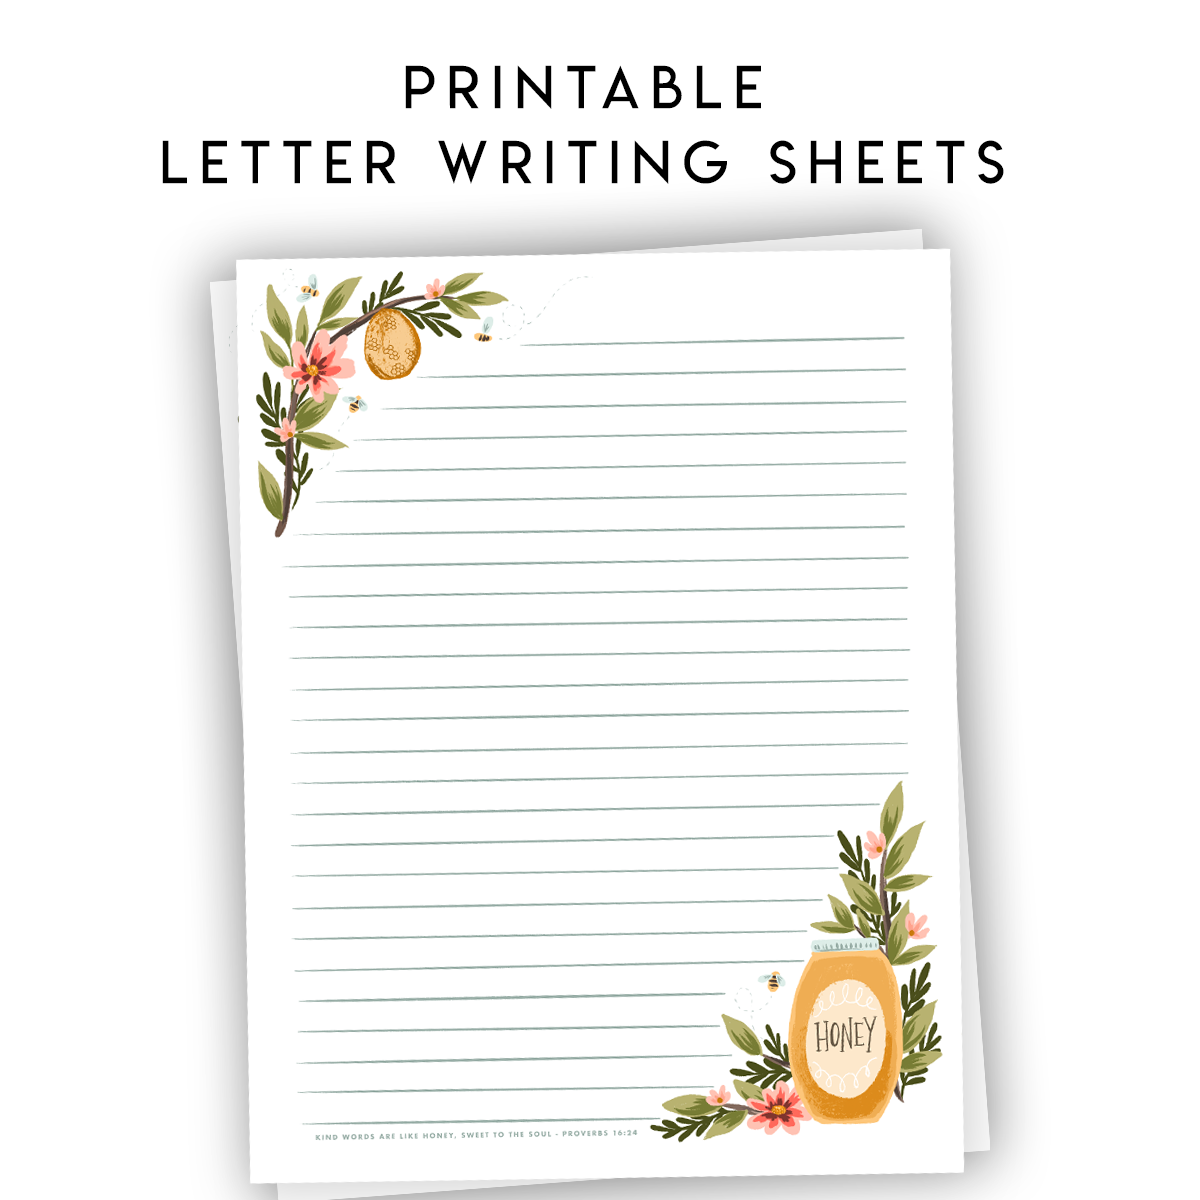 Printable Letter Writing Sheets - Kind Words are Like Honey - Proverbs 16:24